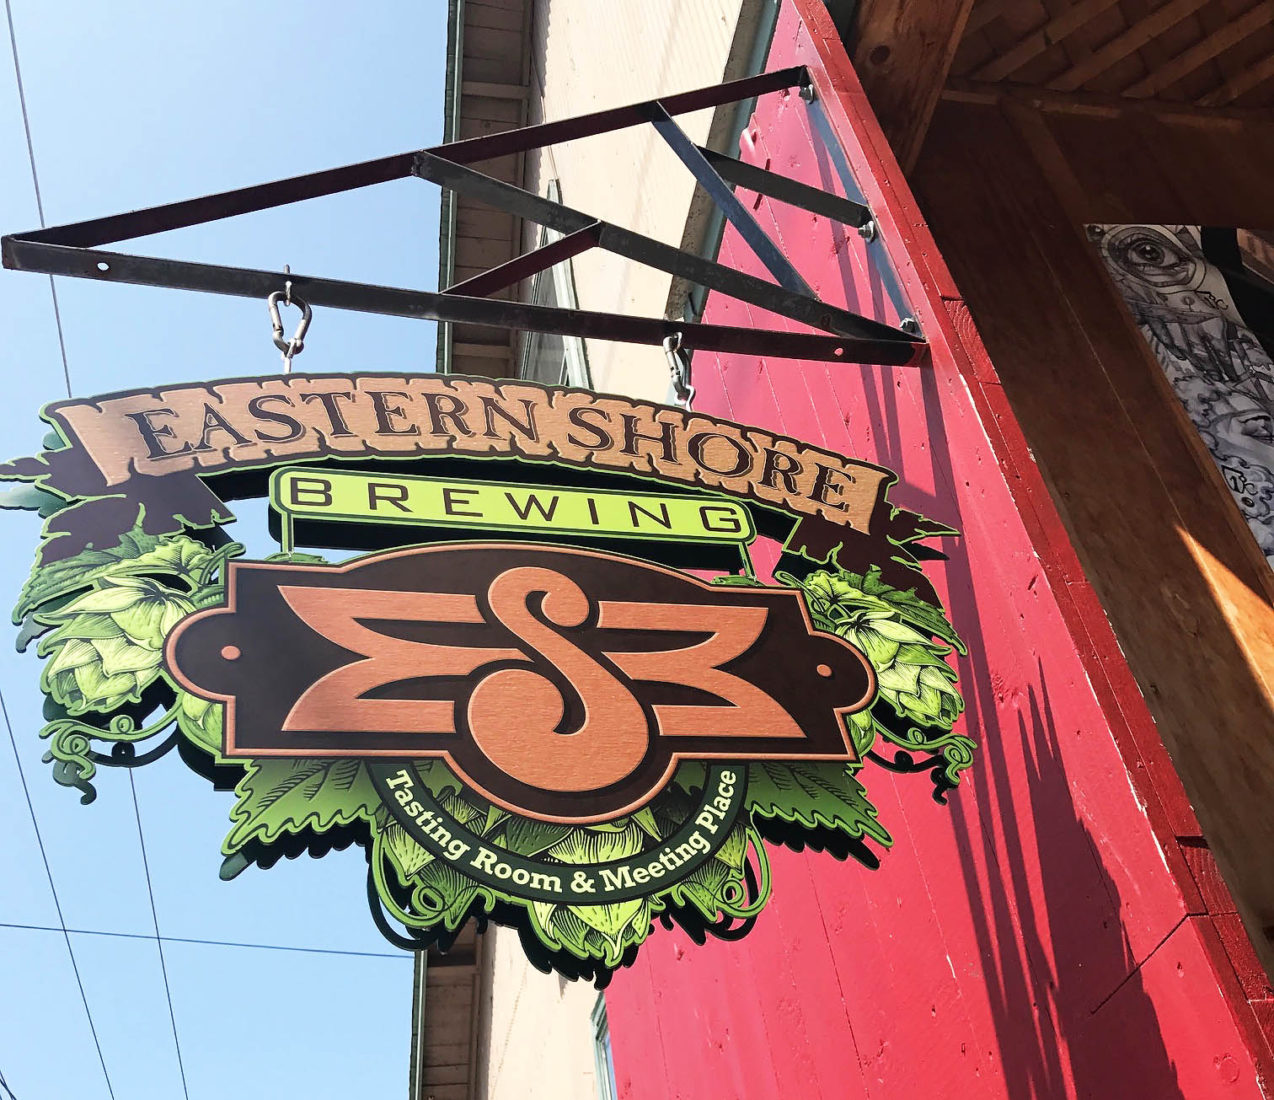 344. Eastern Shore Brewing Co, St. Michaels MD, 2017